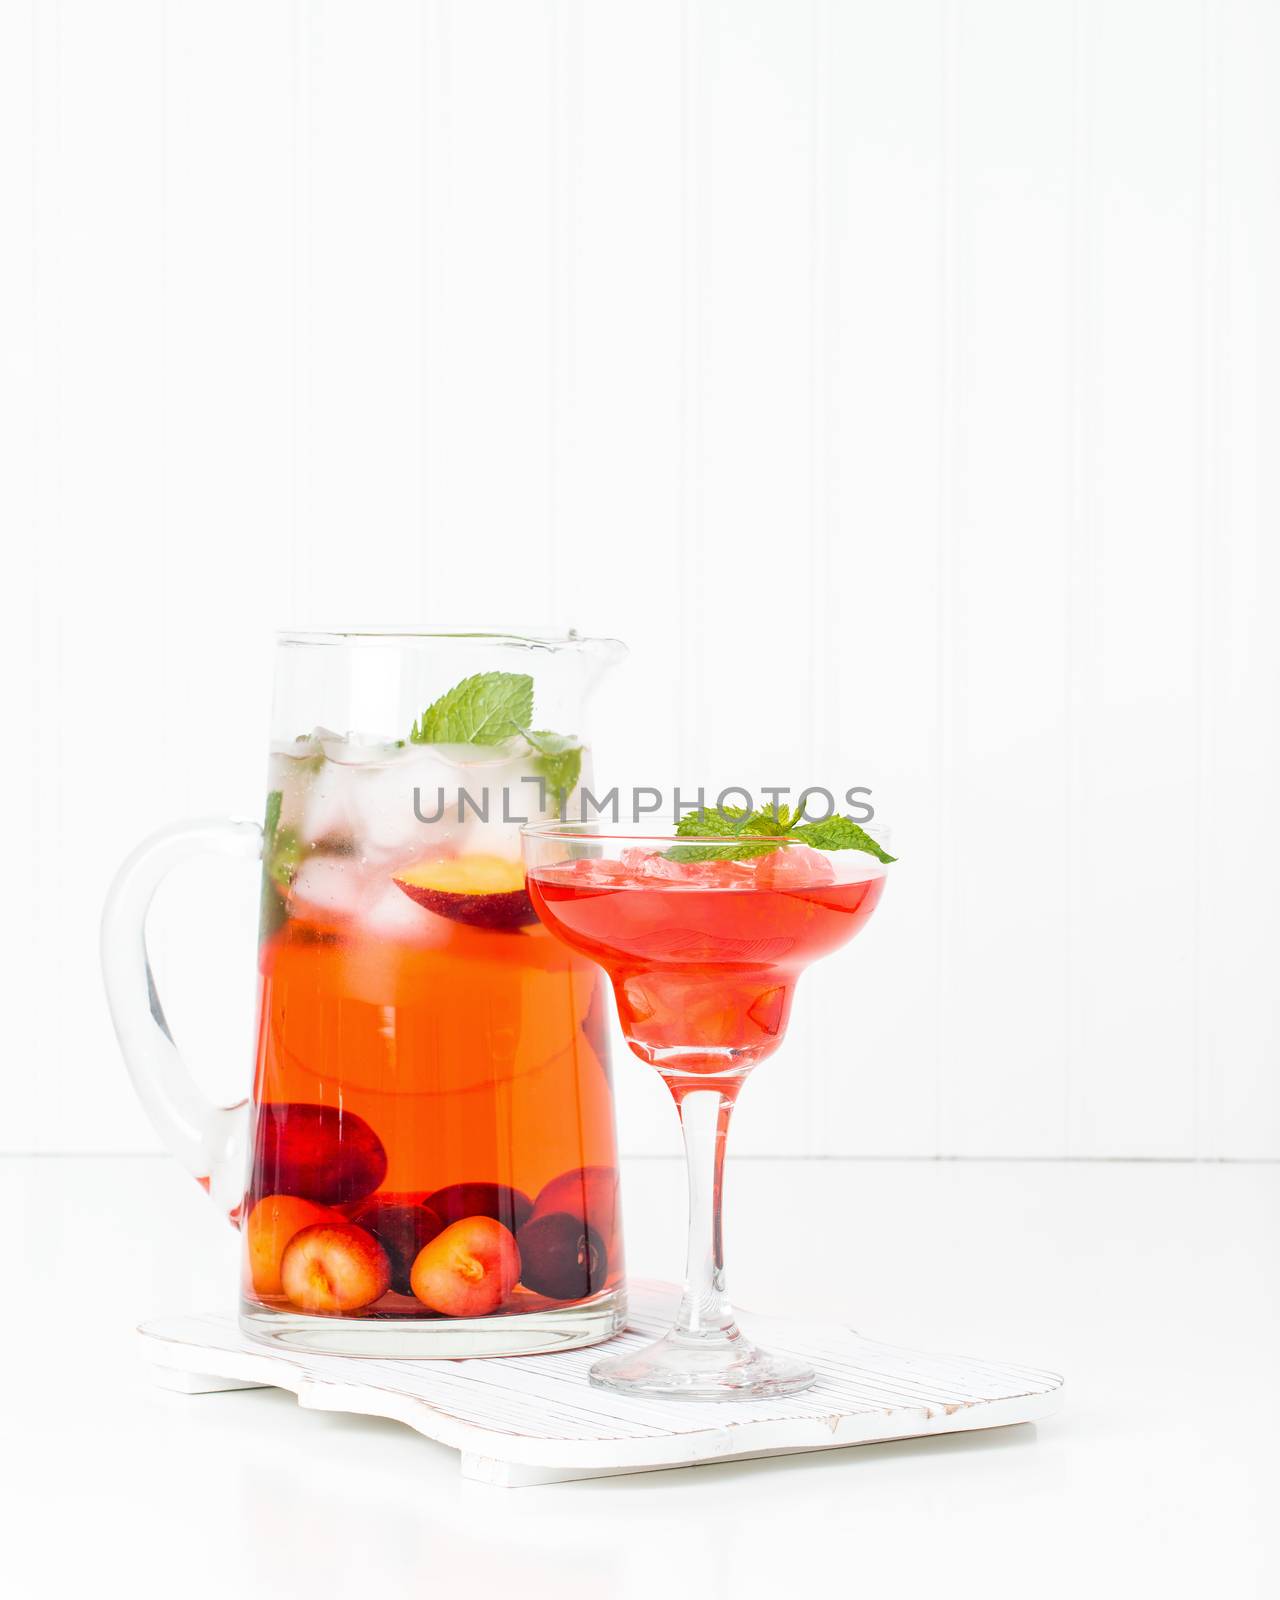 Delicious refreshing summer cocktail made with fresh cherries and peaches.